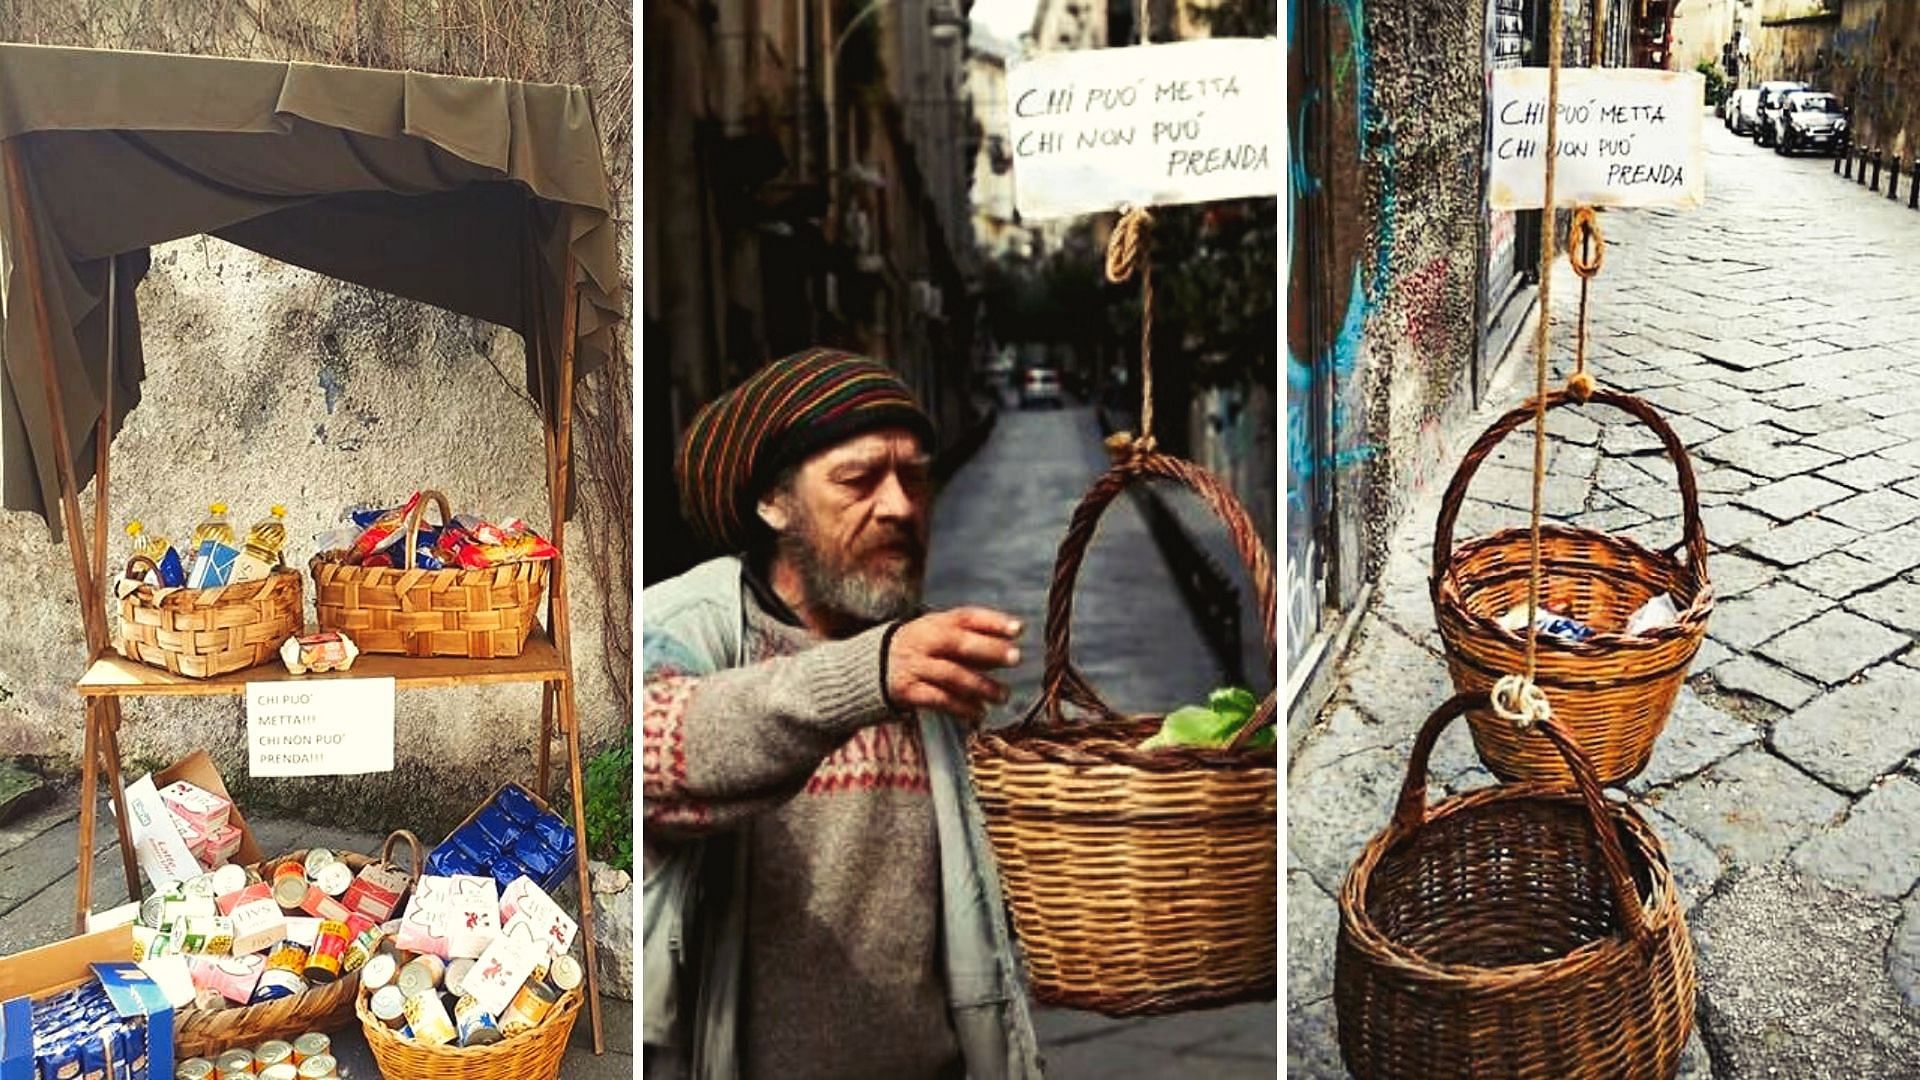 Italians hang food baskets for the homeless outside their homes.